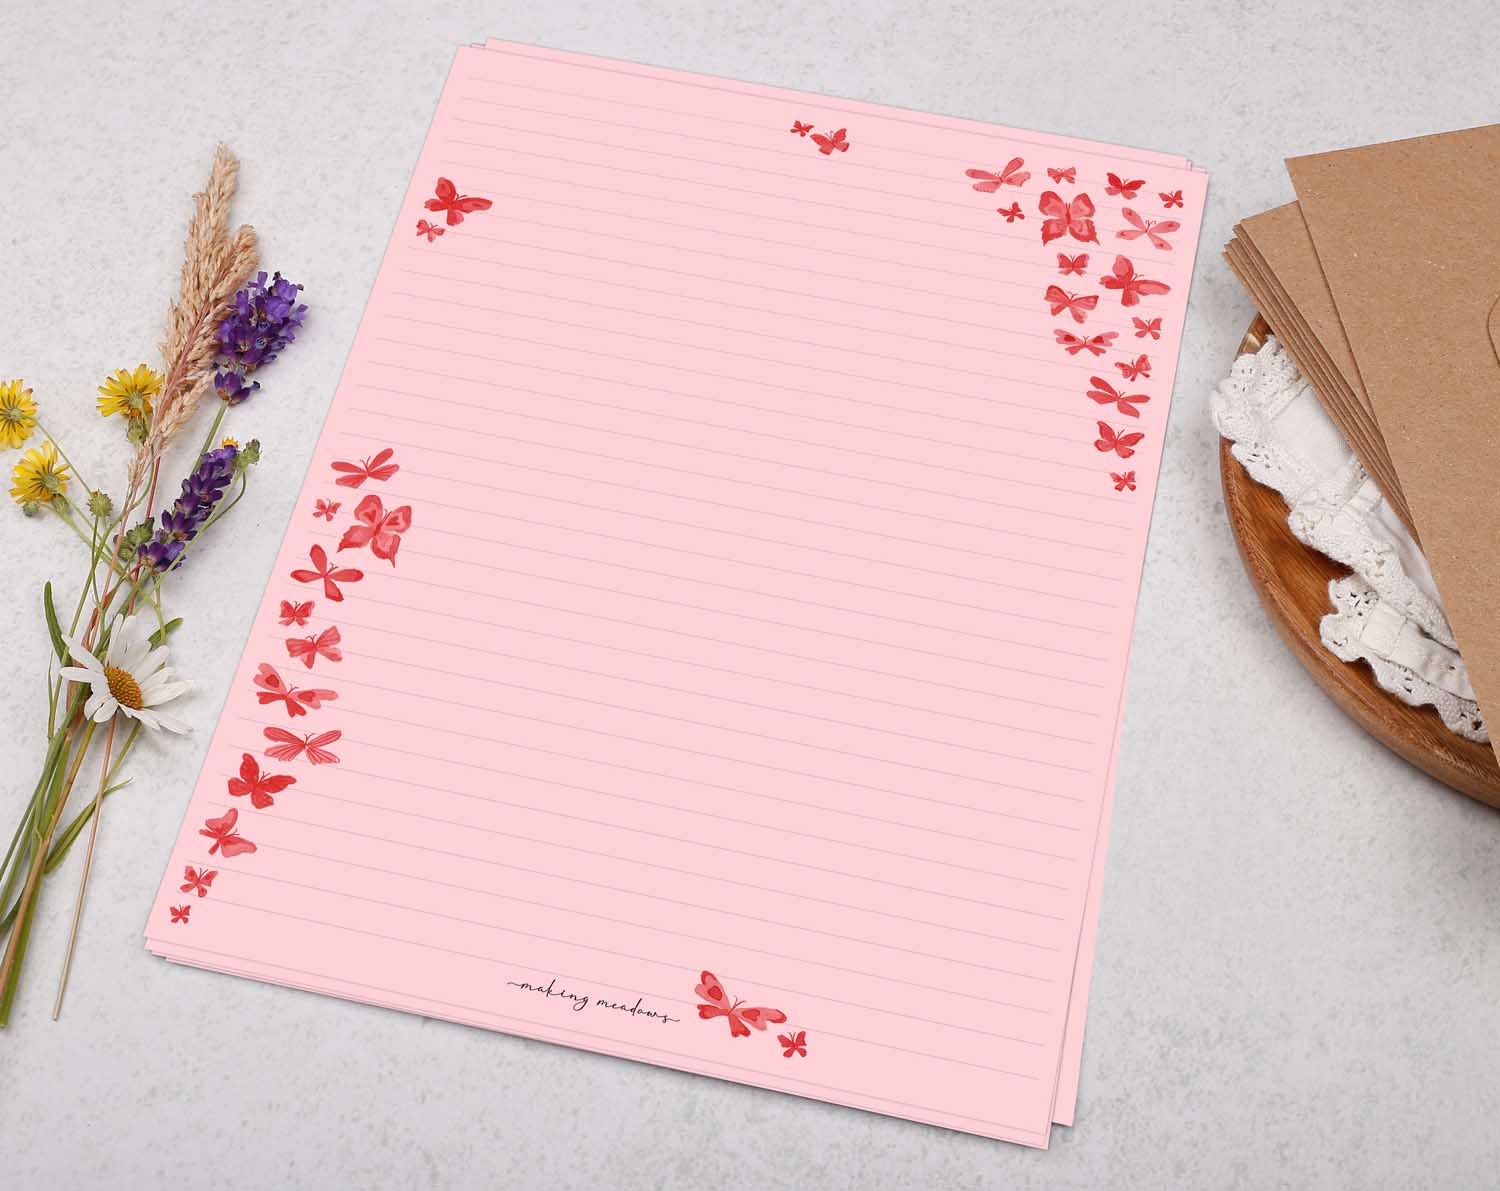 Pink A4 letter writing paper sheets adorned with beautiful pink watercolour butterflies.